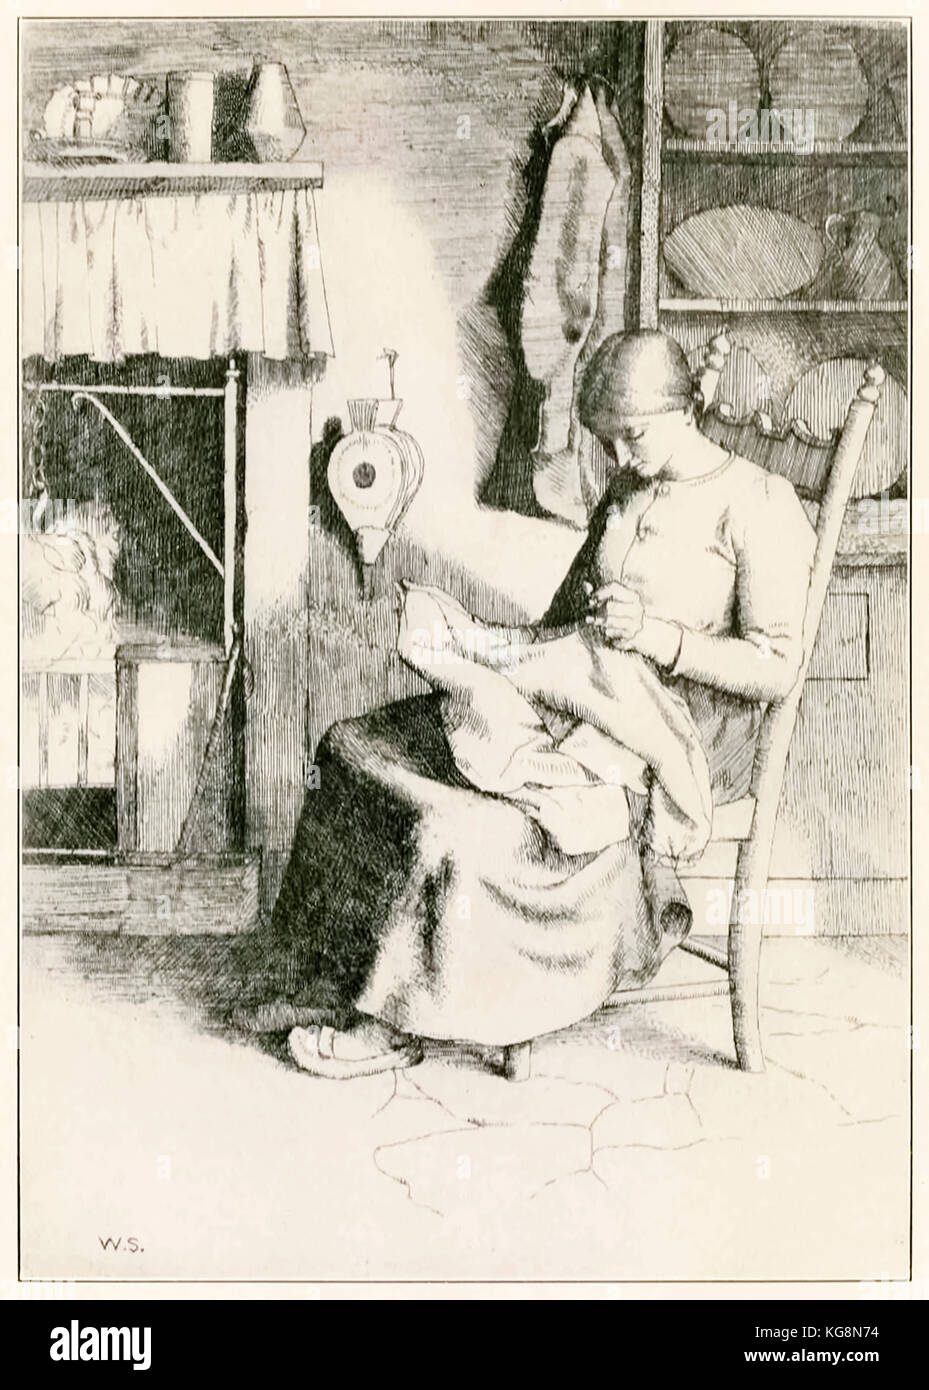 ‘Mercy at Her Work’ from ‘The Pilgrim’s Progress From This World, To That Which Is To Come’ by John Bunyan (1628-1688) illustration by William Strang (1859-1921). Mercy makes and mends things for the poor. See more information below. Stock Photo